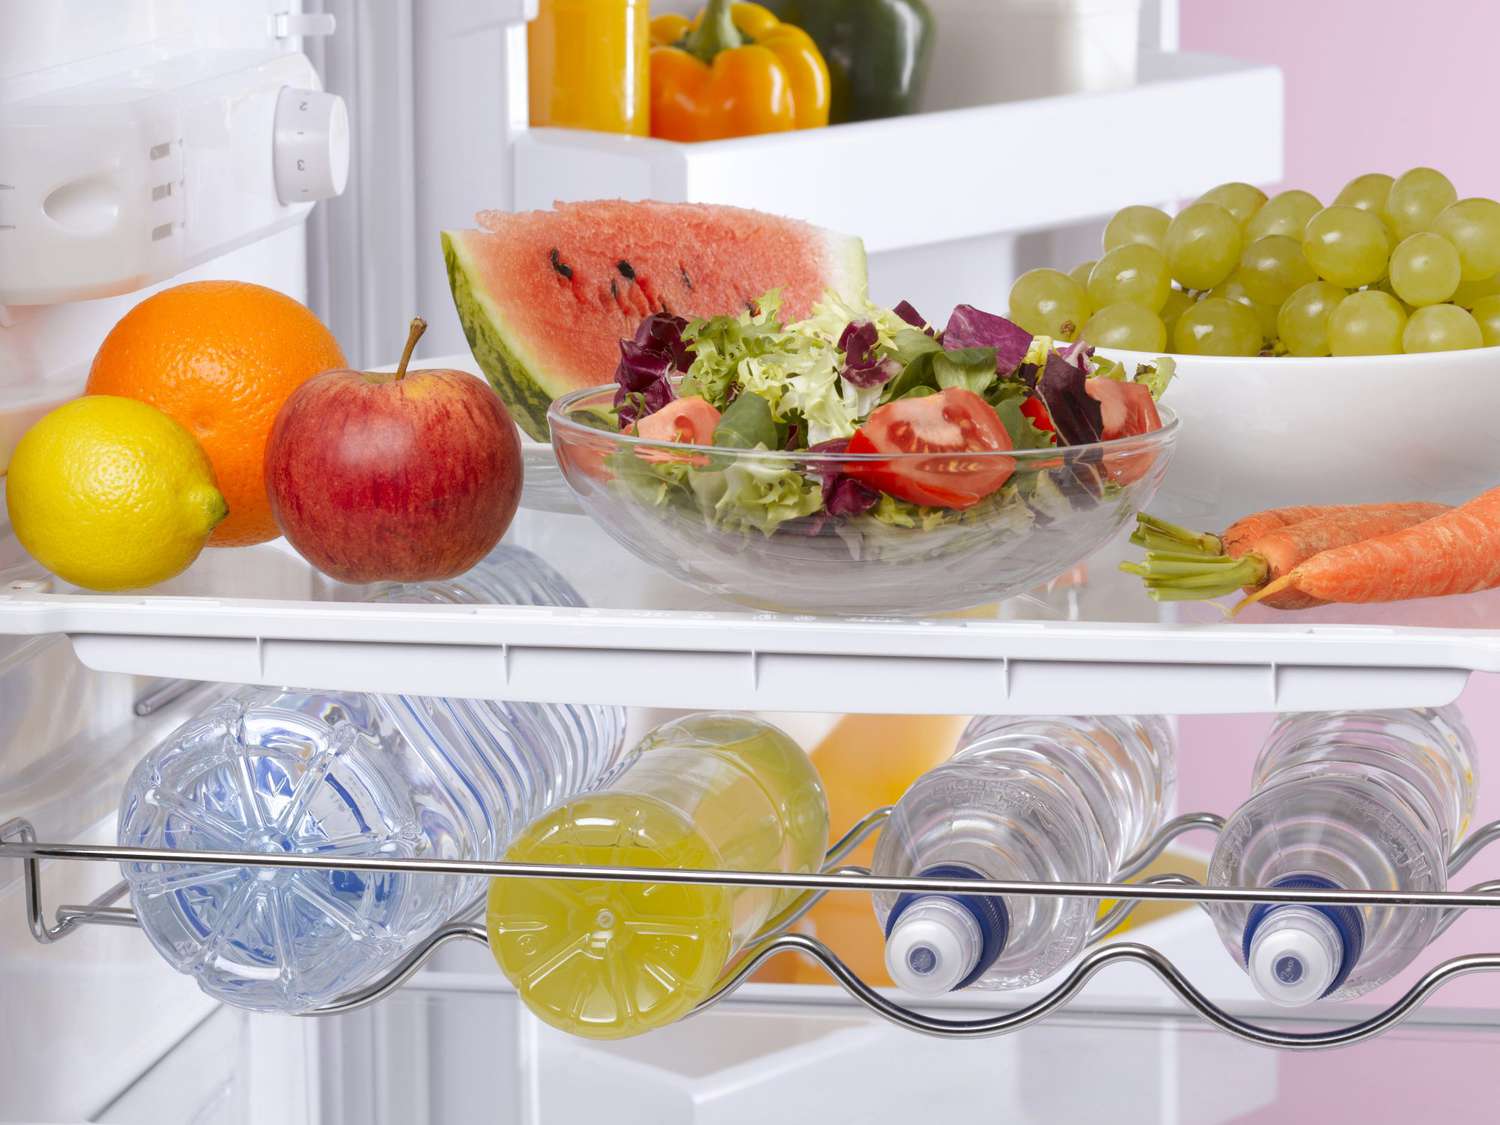 How Cold Does A Salad Bar Or Refrigerator Have To Be To Keep Food Safe